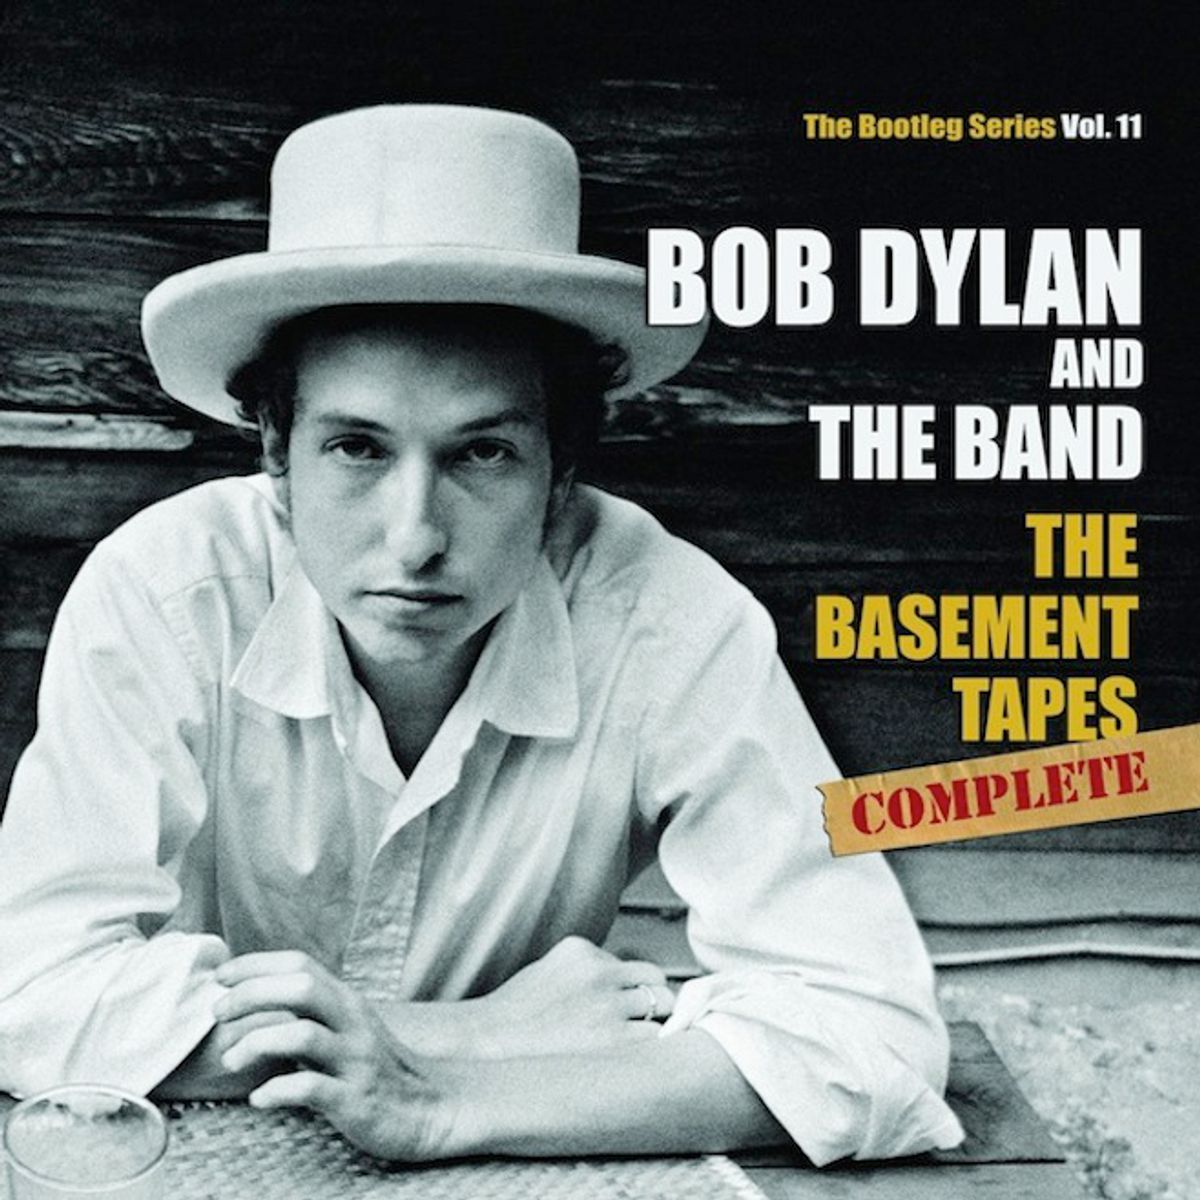 Bob Dylan - 'The Basement Tapes Raw'